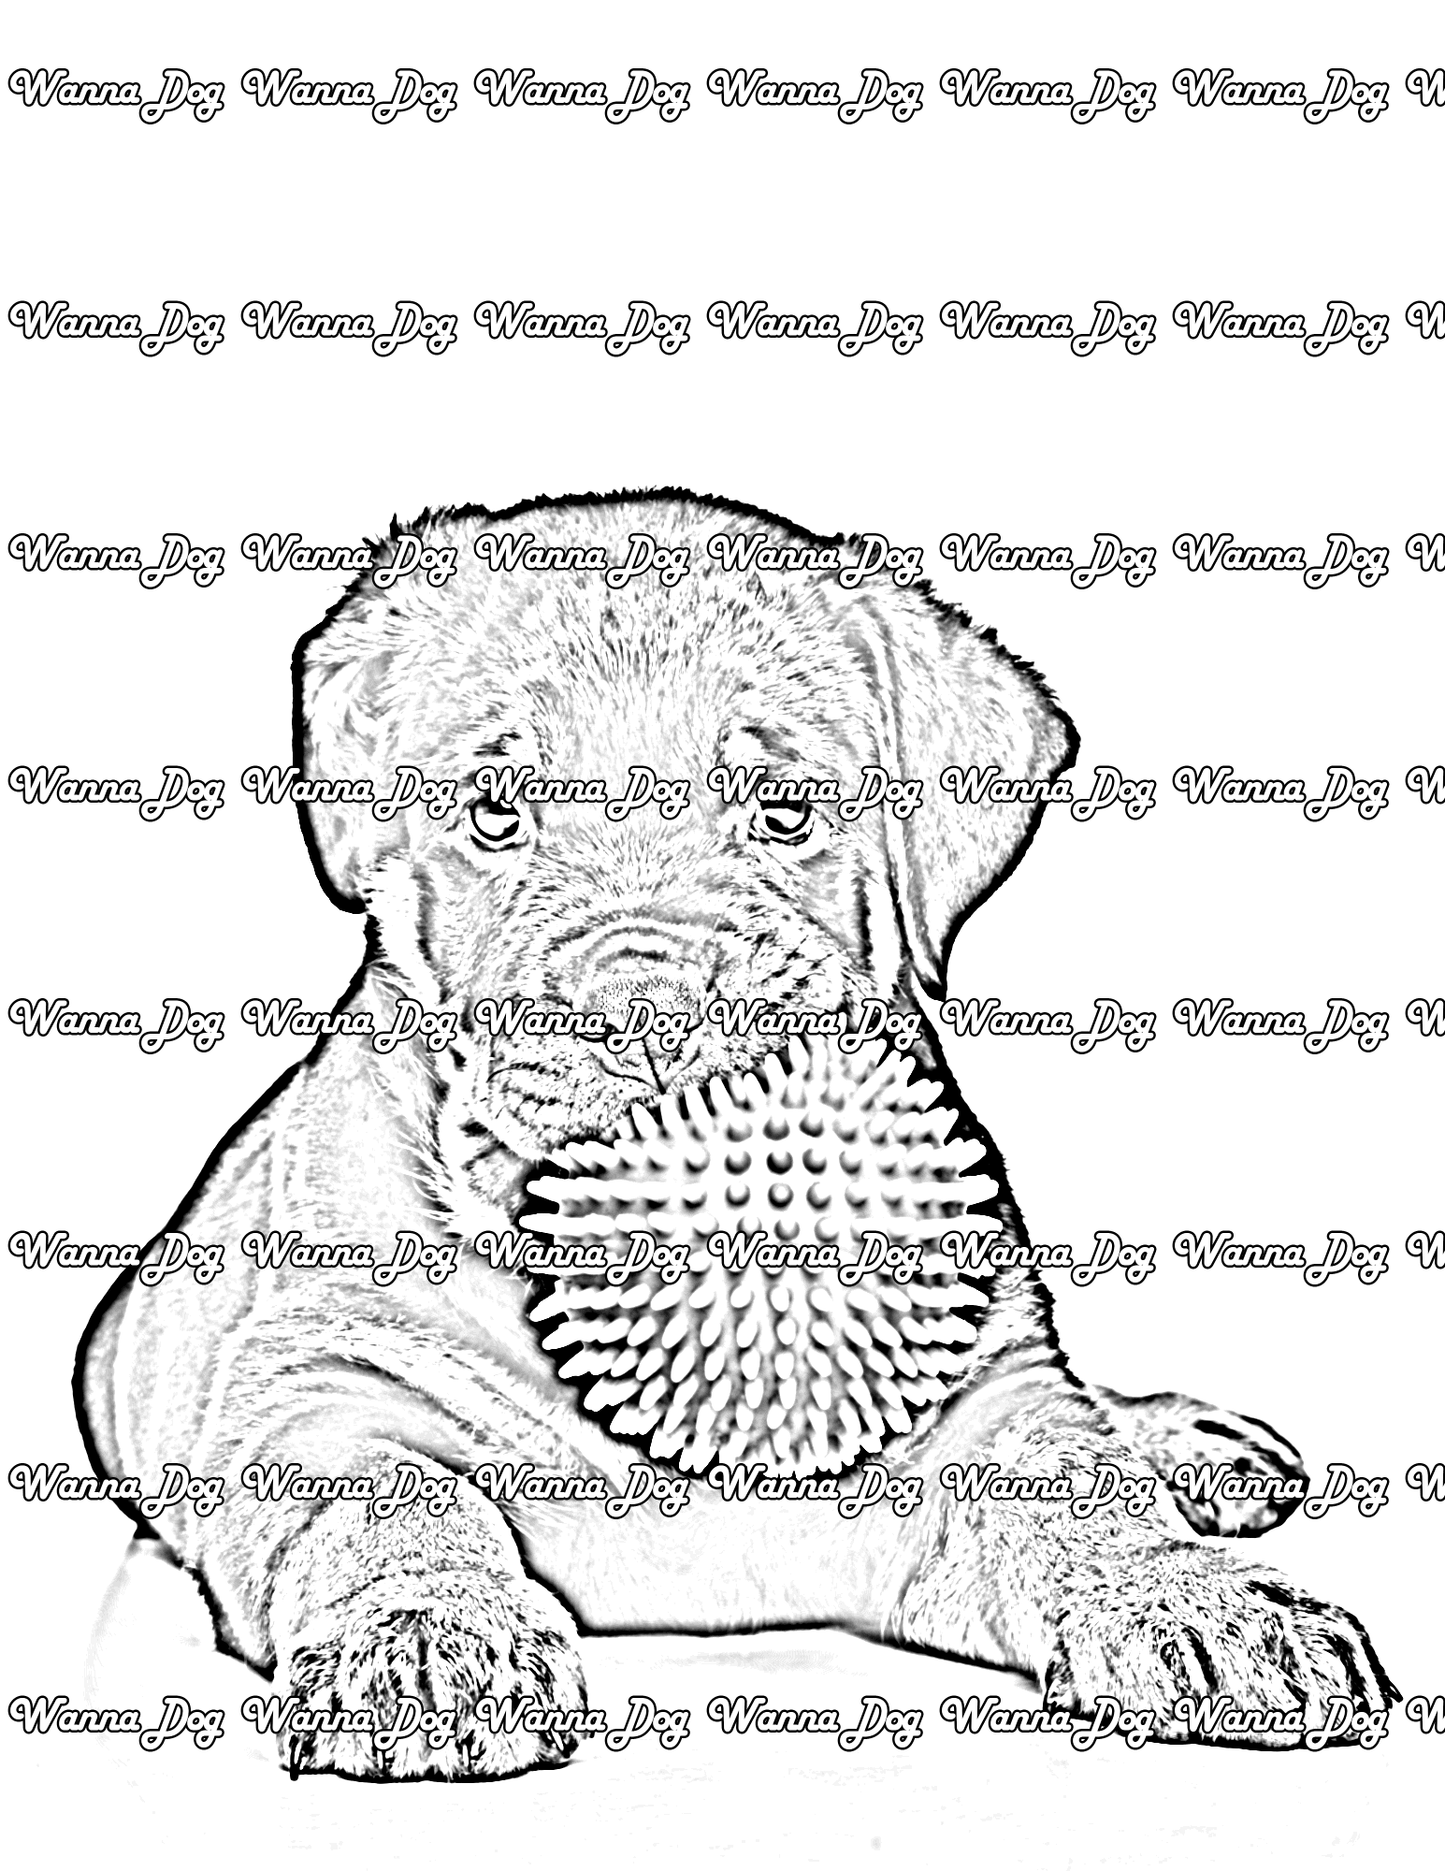 Rottweiler Puppy Coloring Page of a Rottweiler Puppy sitting down and playing with a ball